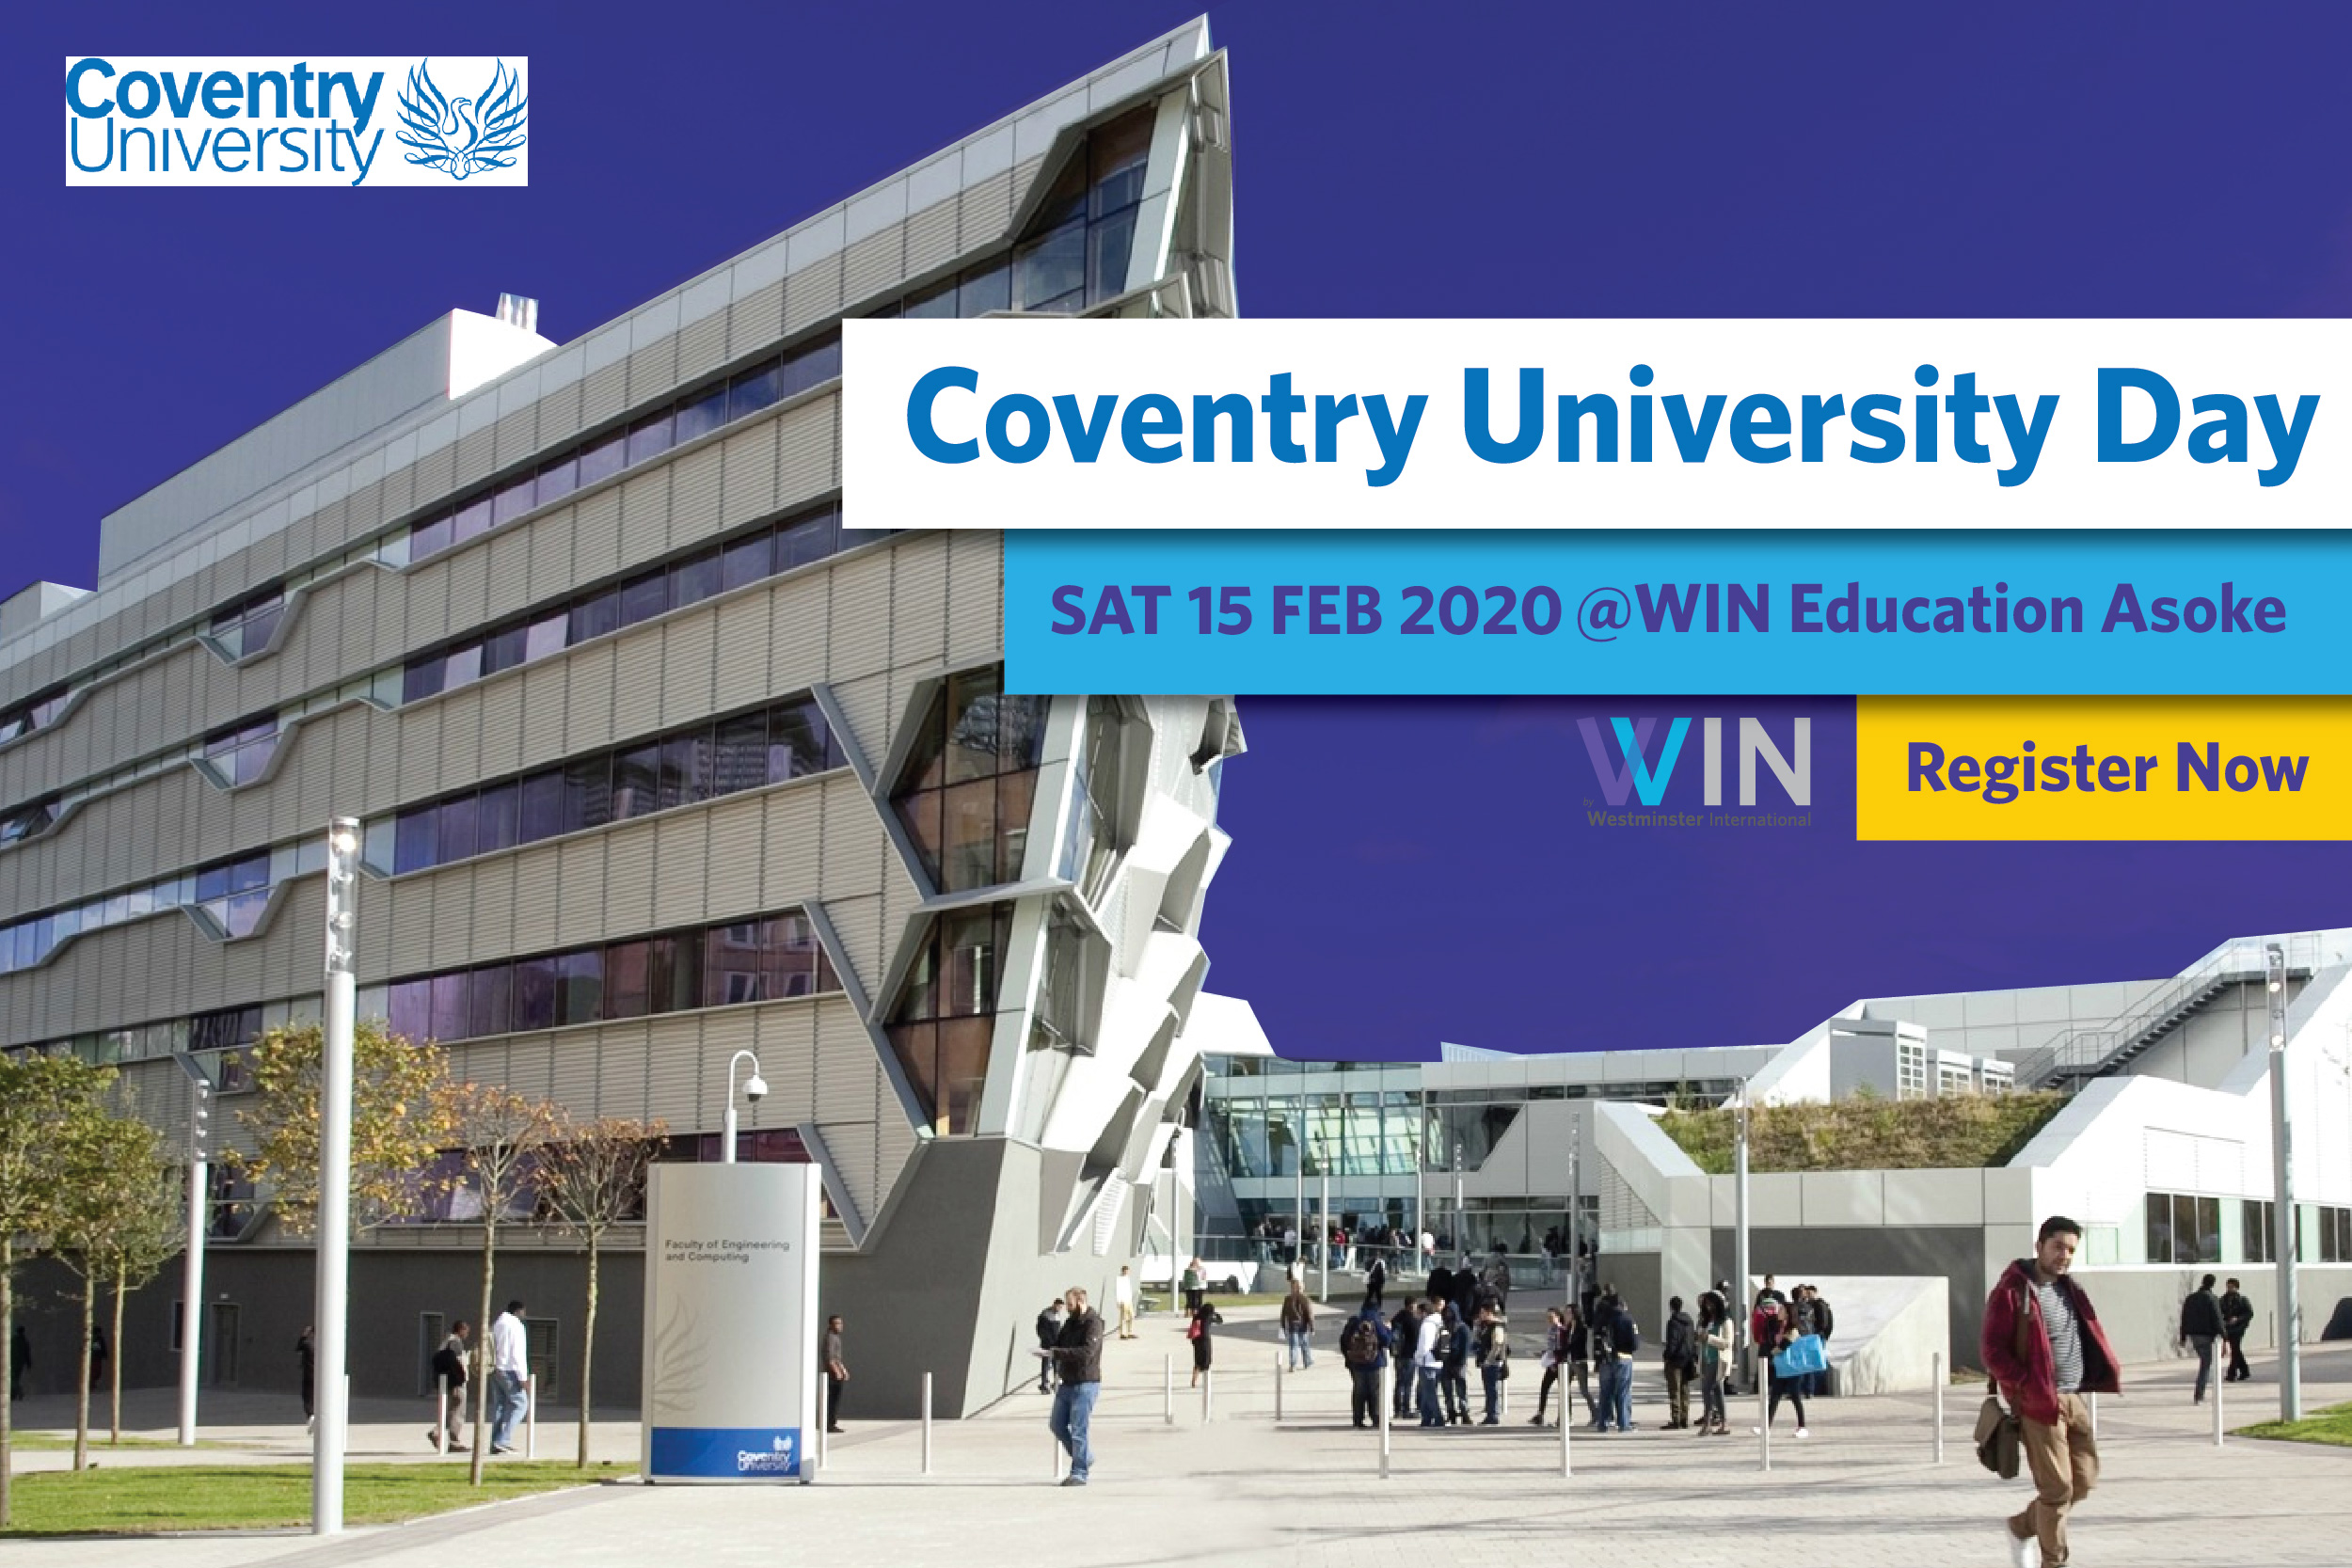 Coventry University Day